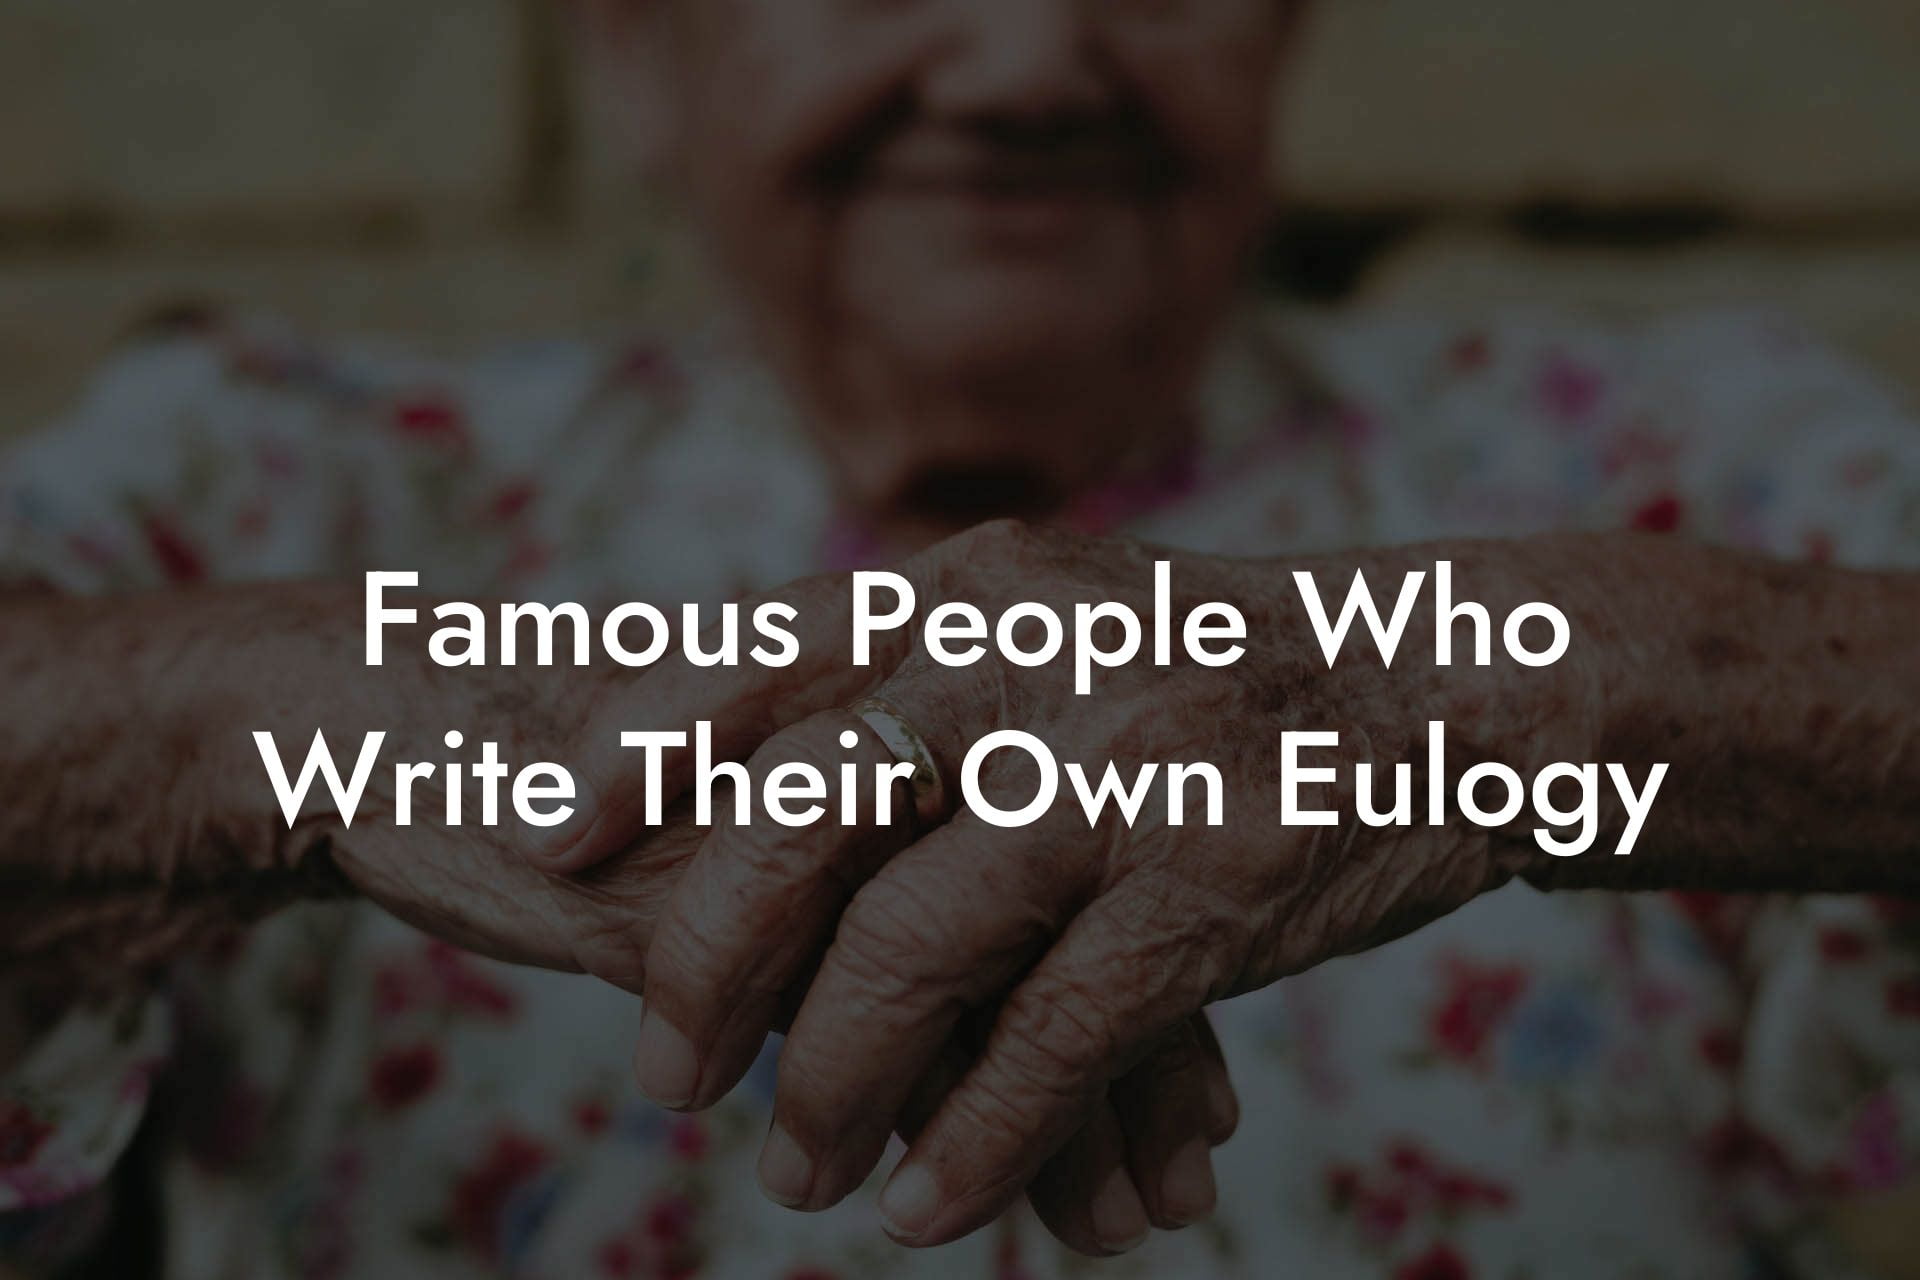 Famous People Who Write Their Own Eulogy